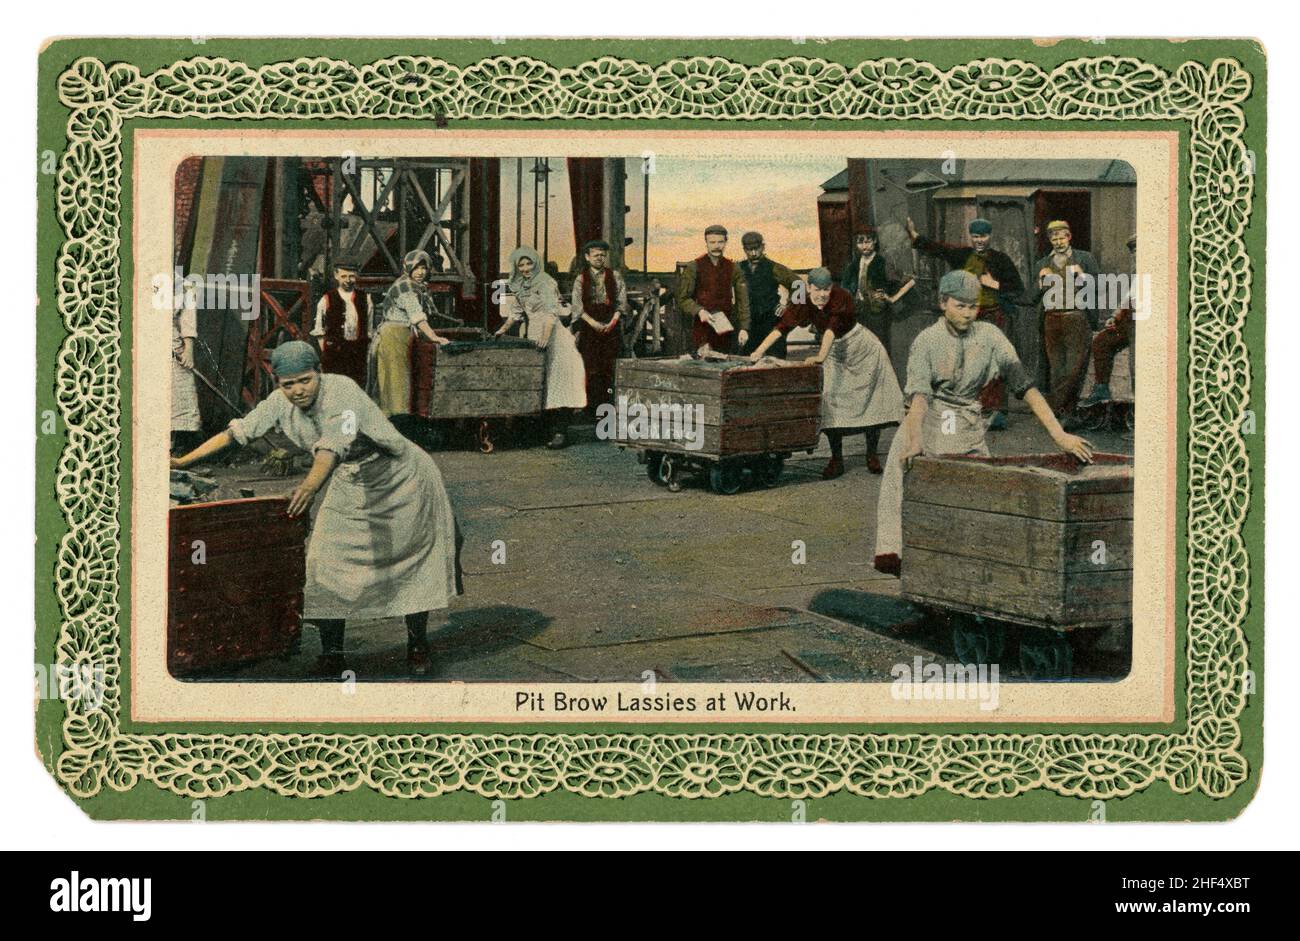 Original early 1900's Edwardian greetings postcard of Lancashire Pit Brow Lassies at work, hauling coal in trucks, Newfoundland No. 1 Colliery, Wigan, Greater Manchester, Lancashire, England, U.K. Photographed in 1907. Published by J. Starr and Sons Ltd. Wigan. Stock Photo